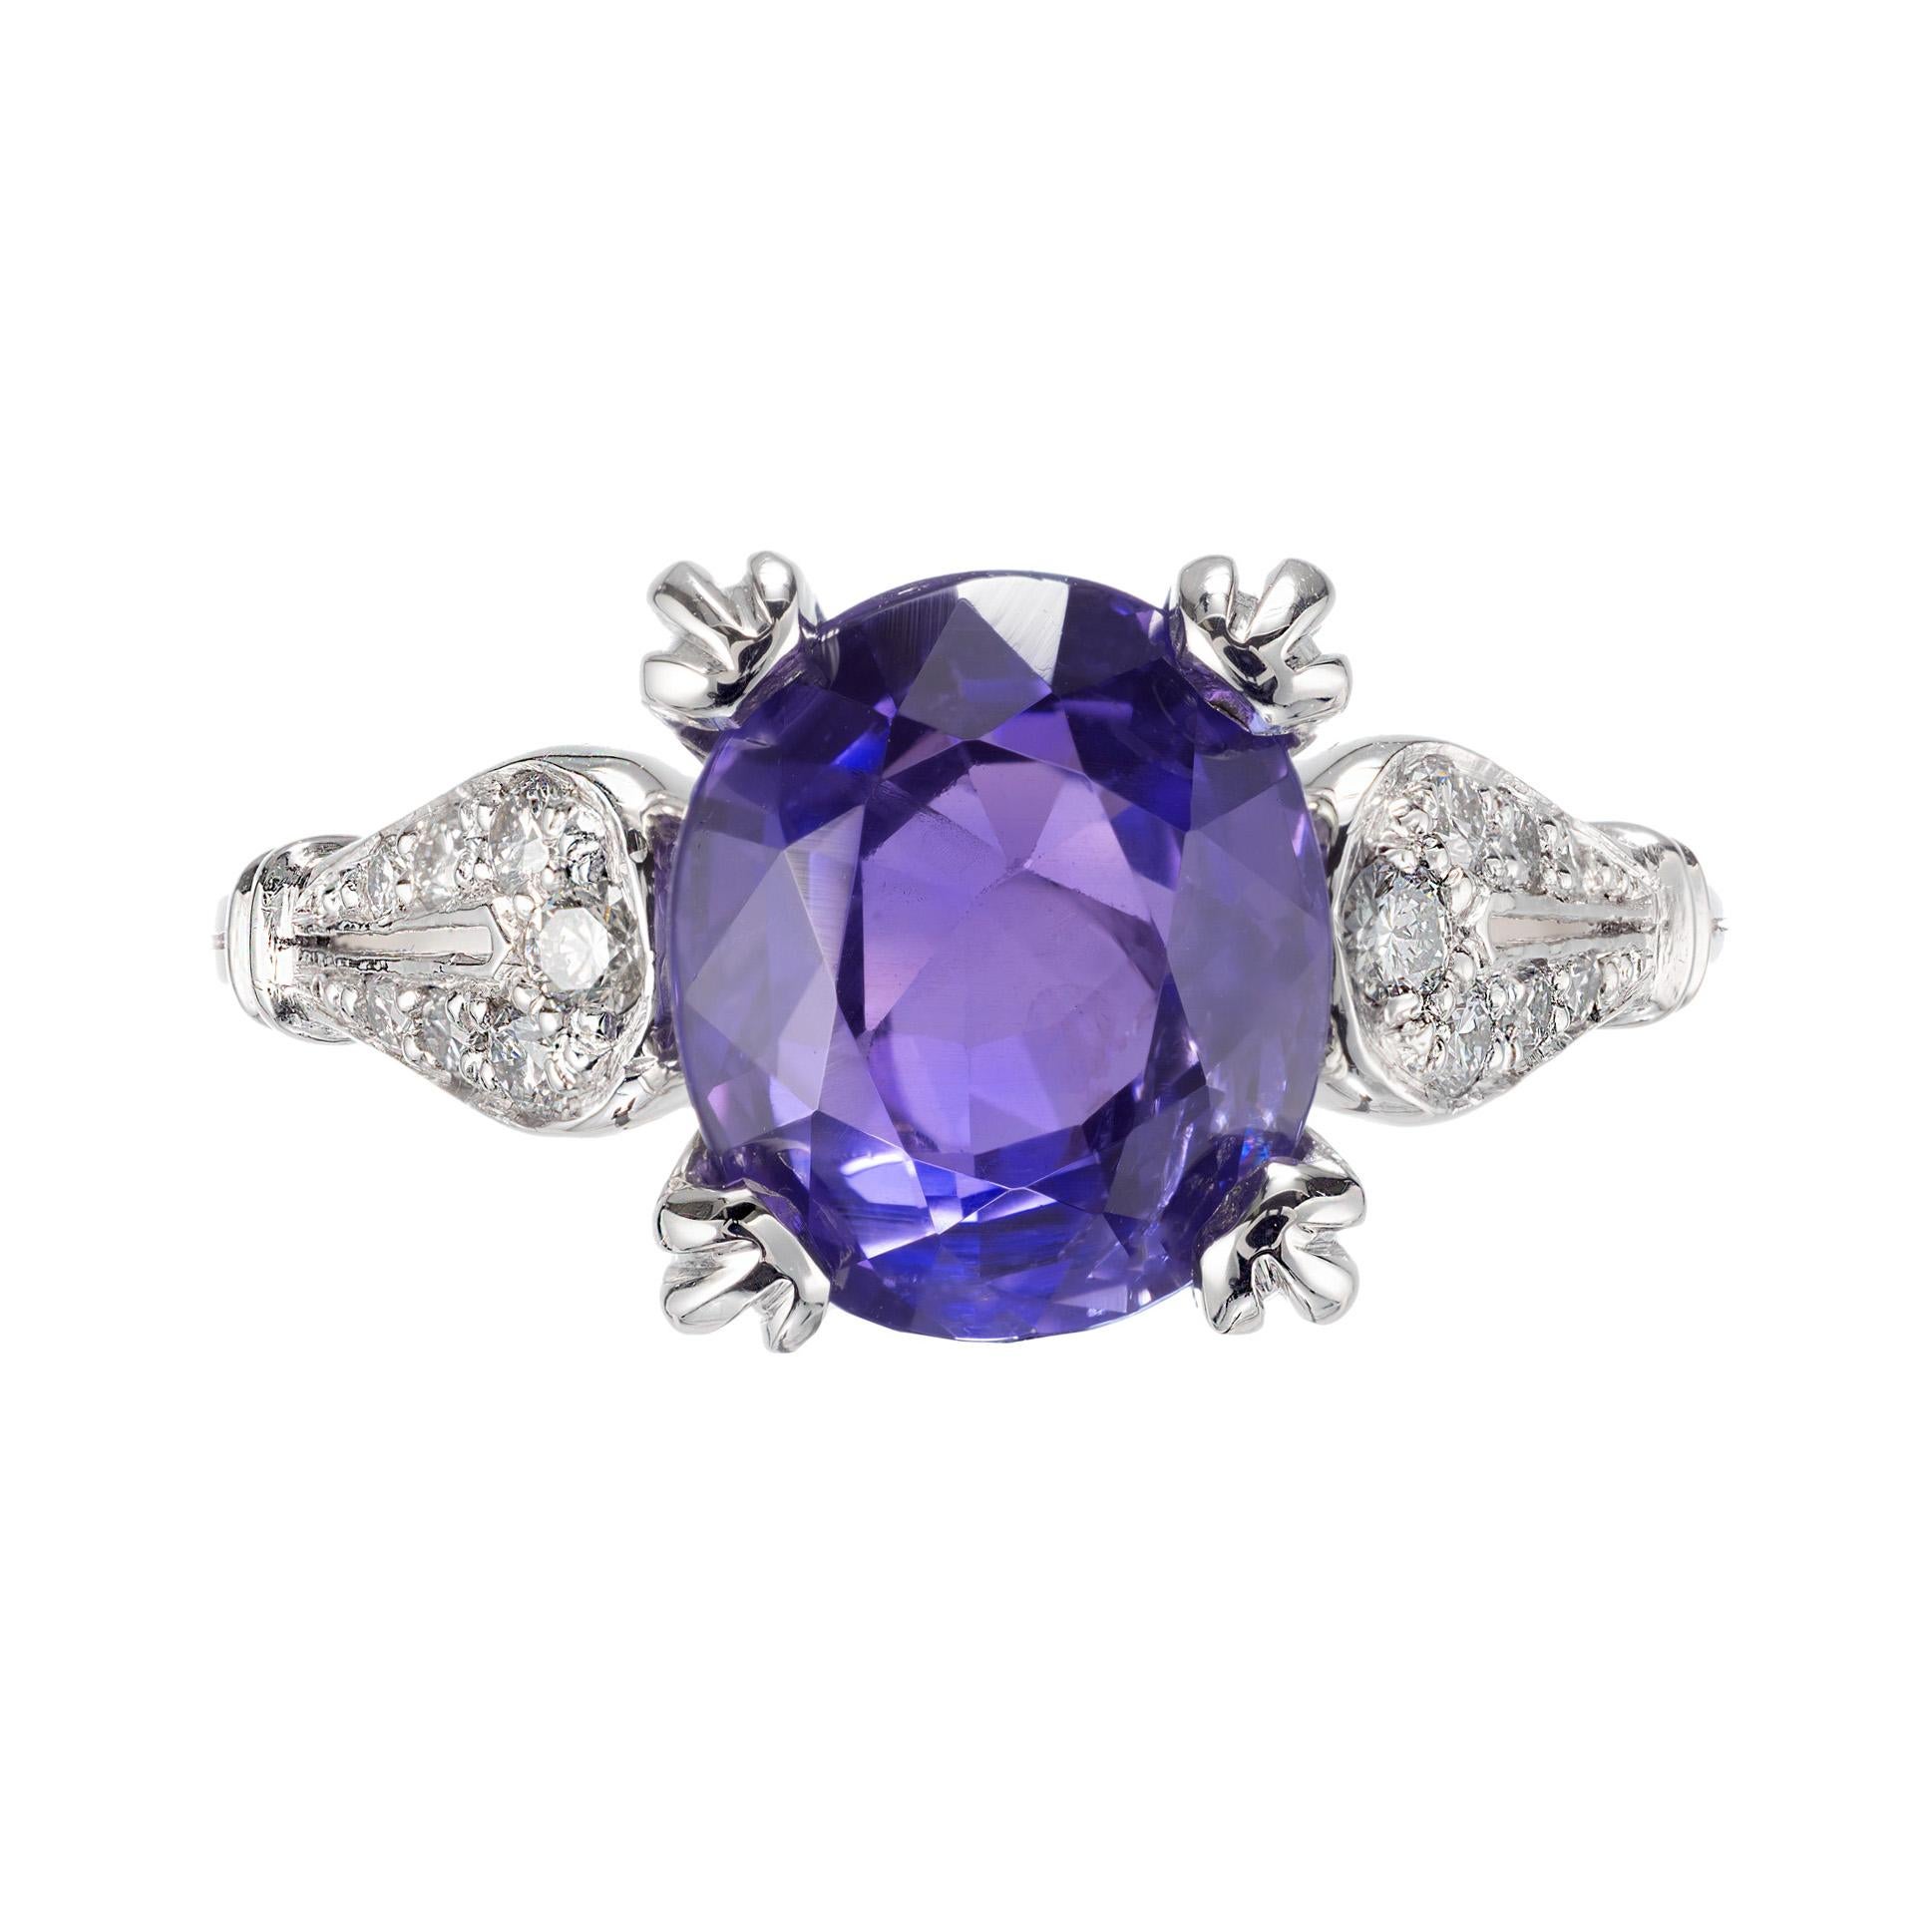 Oval violet blue sapphire and diamond engagement ring. GIA certified no heat color change center sapphire in a platinum setting with 14 round brilliant cut accent diamonds. Color changes from violet to blue when viewed under daylight or fluorescent